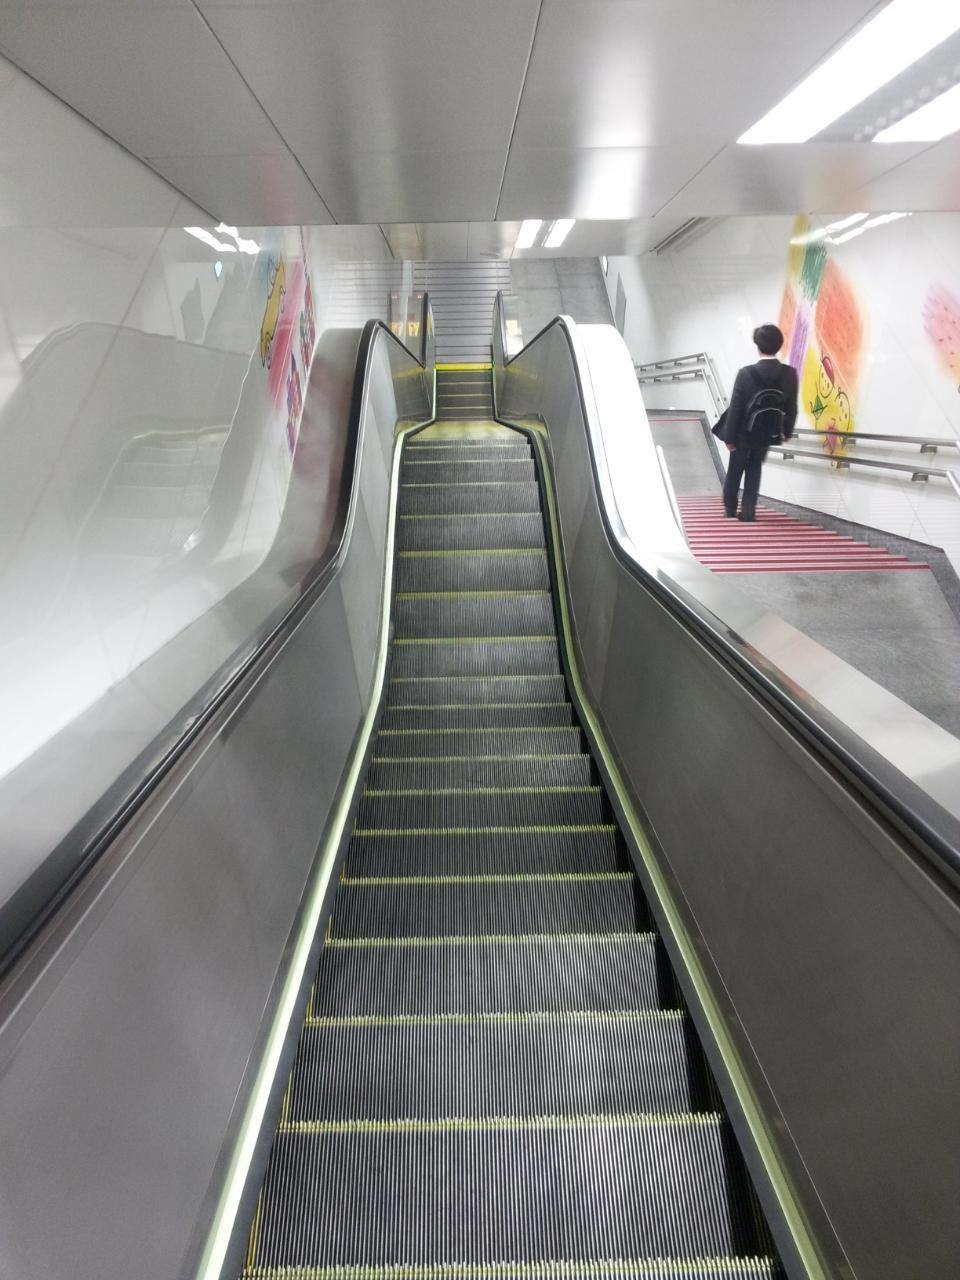 Escalator with yellow safety striping on steps. Instead of constant decline to the bottom, the escalator has a section in the middle that runs straight across